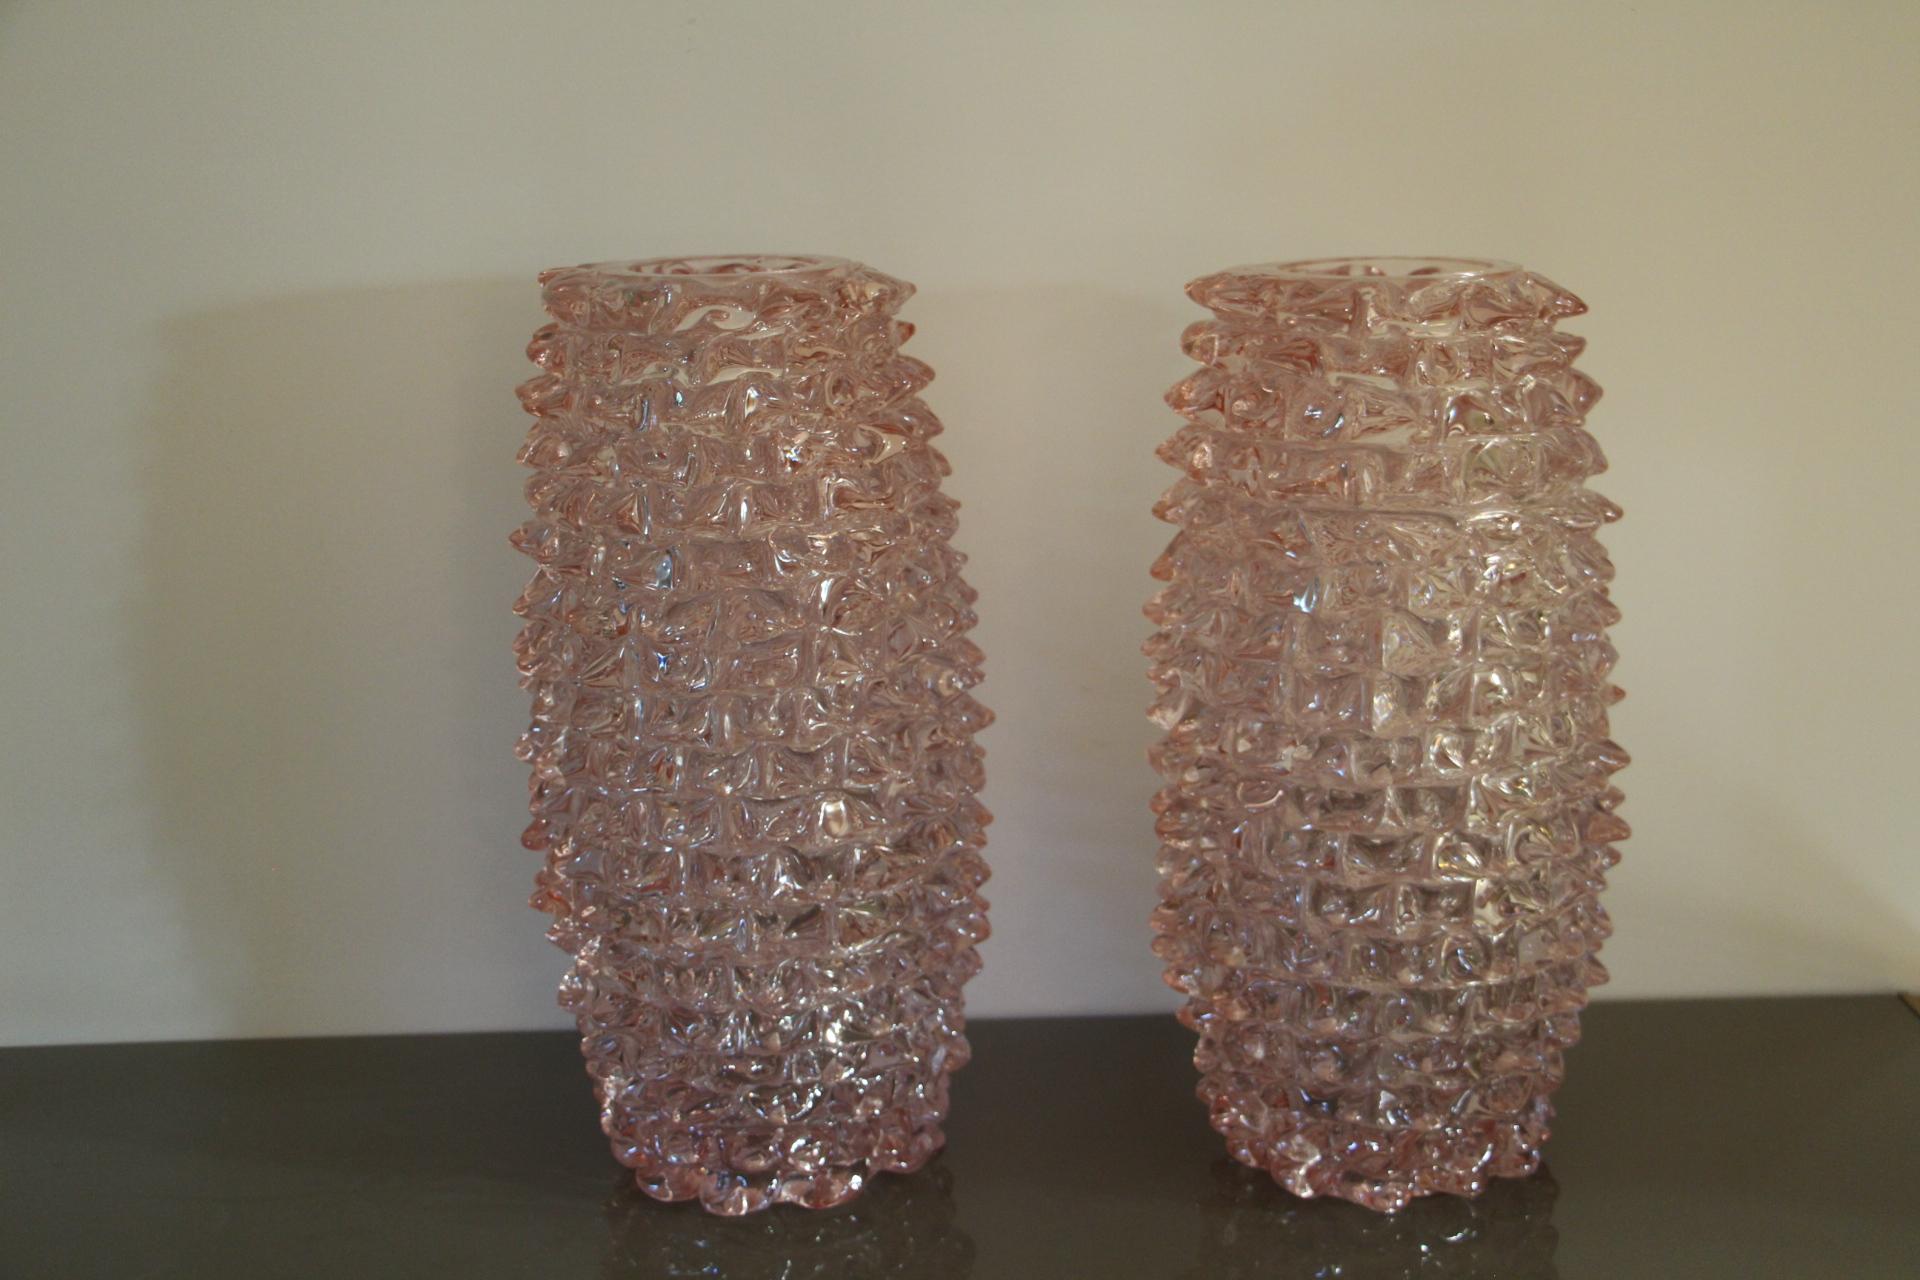 A spectacular pair of Venetian vases, imposing size in very delicate pink color blown Murano glass, hand decorated with the technique rostrato: spikes of glass individually pulled in relief.
Thick walled casing glass produces a lot of iridescent